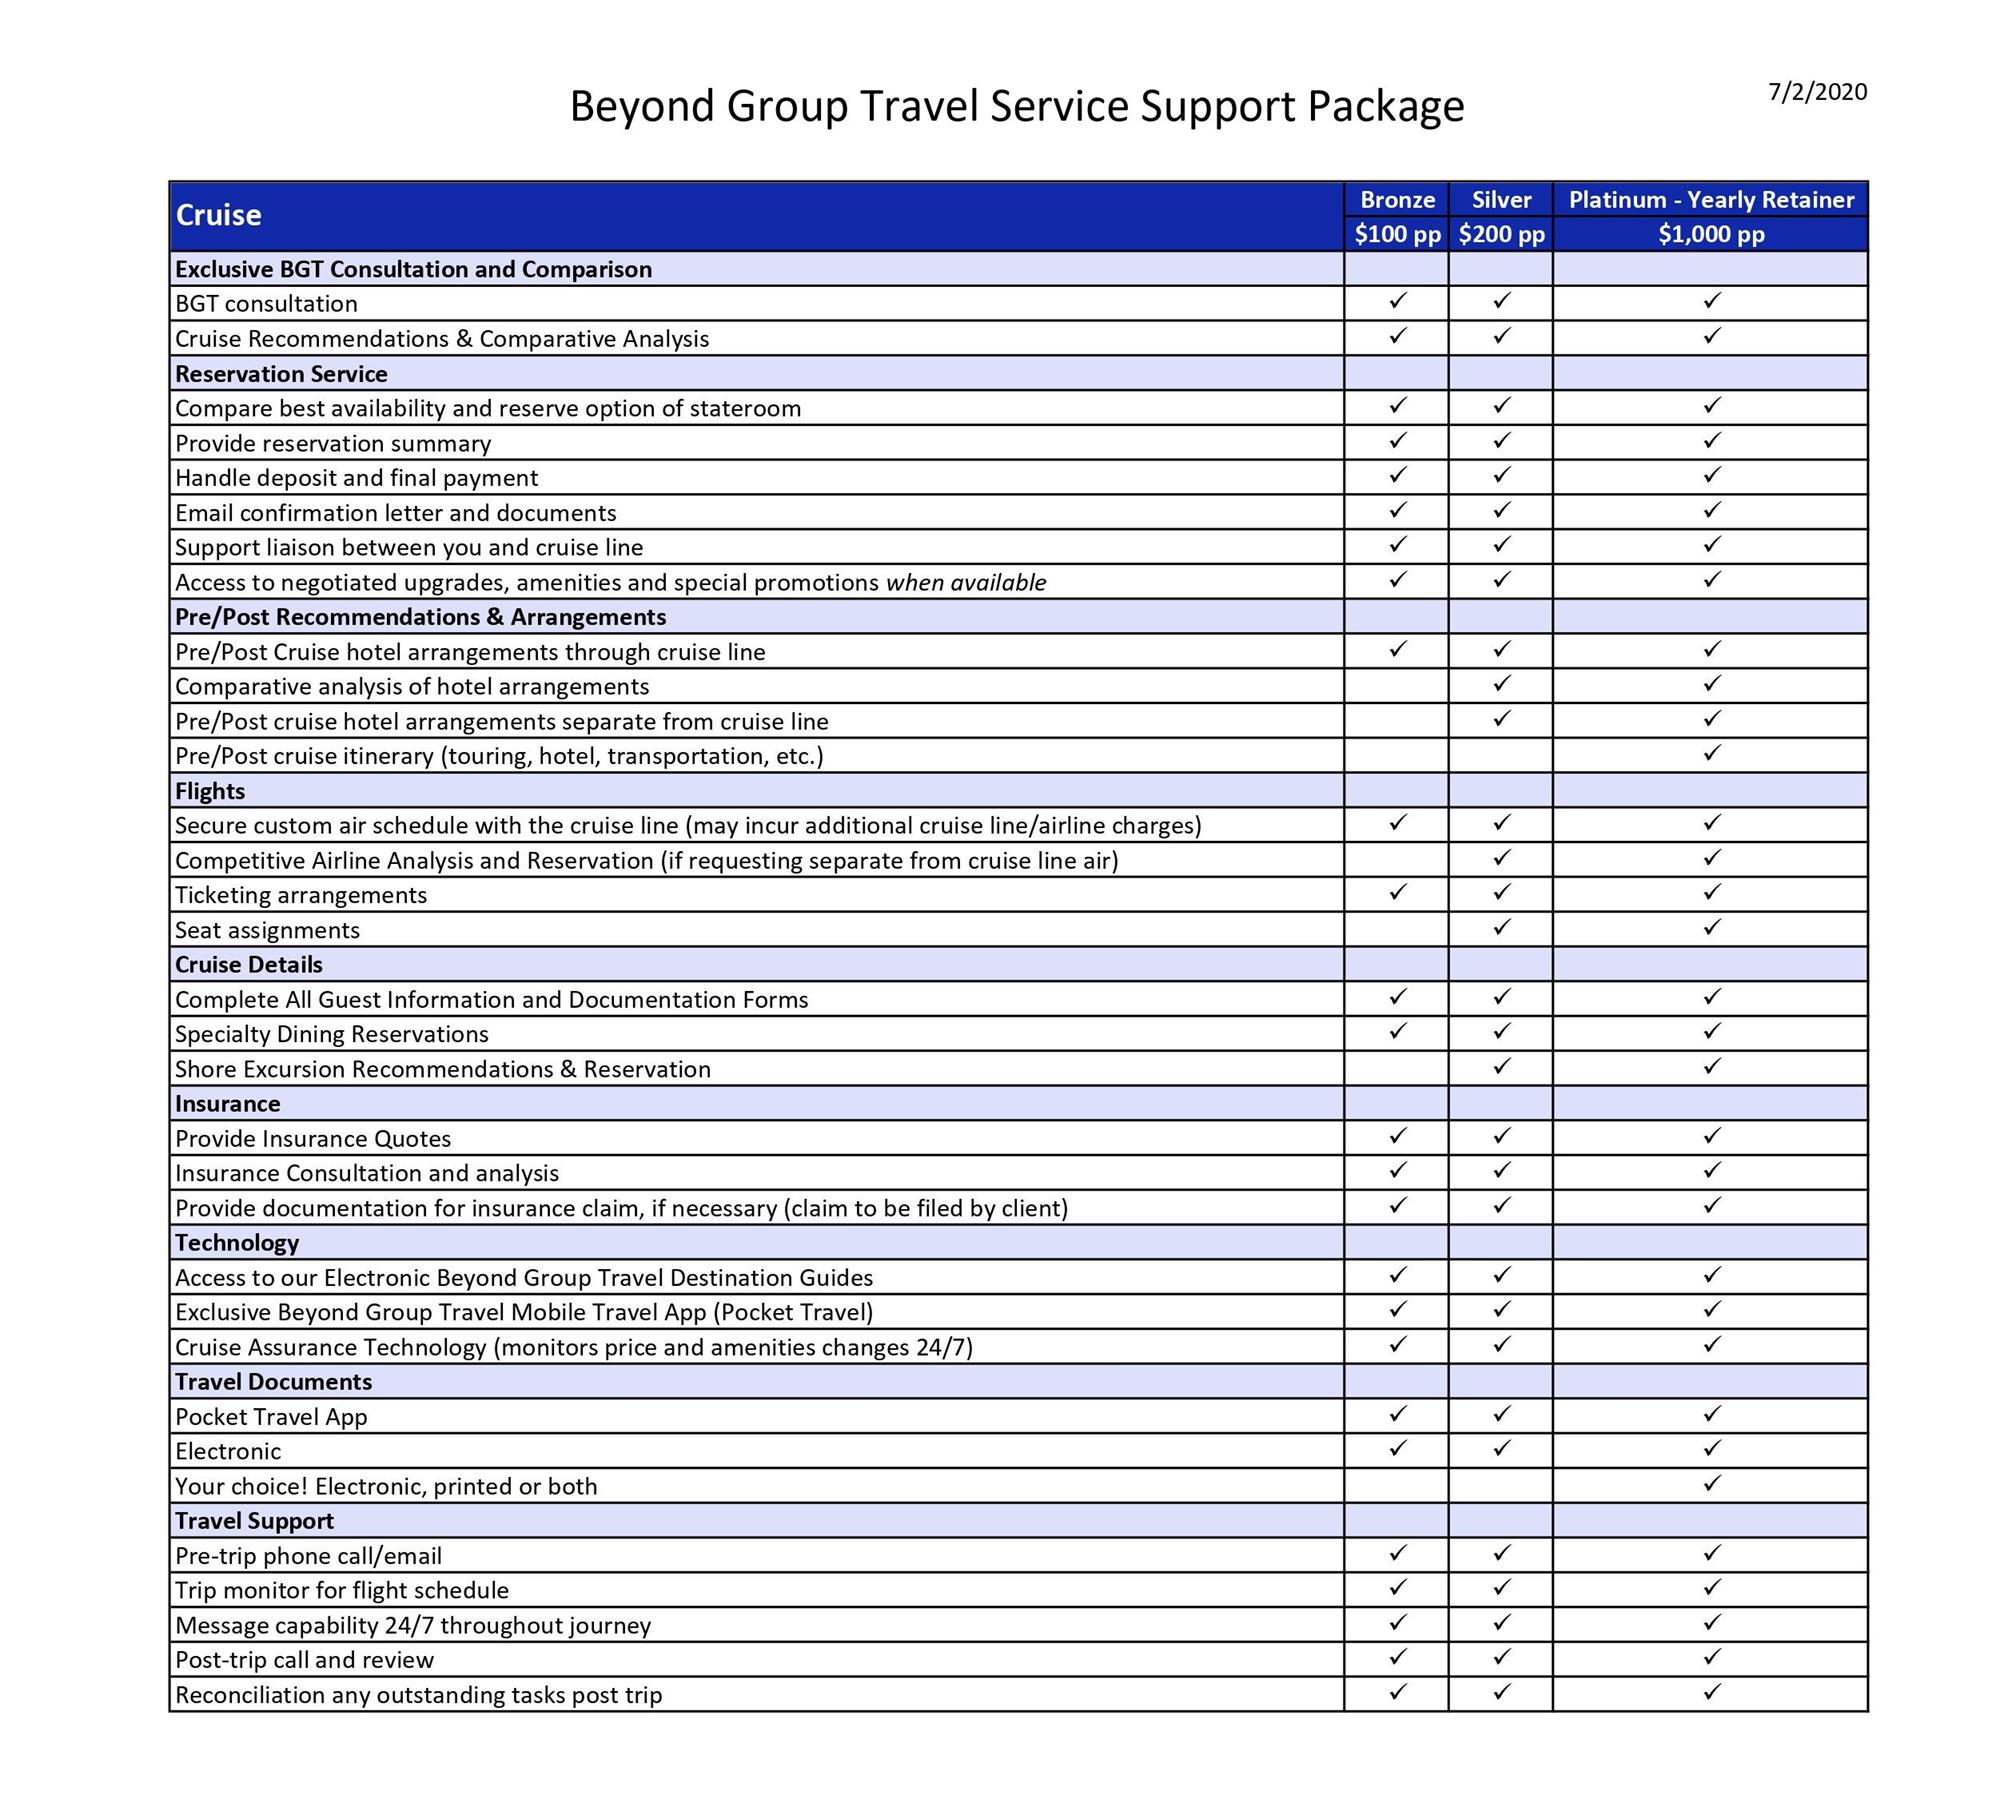 Beyond Group Travel Service & Support Package - Cruise